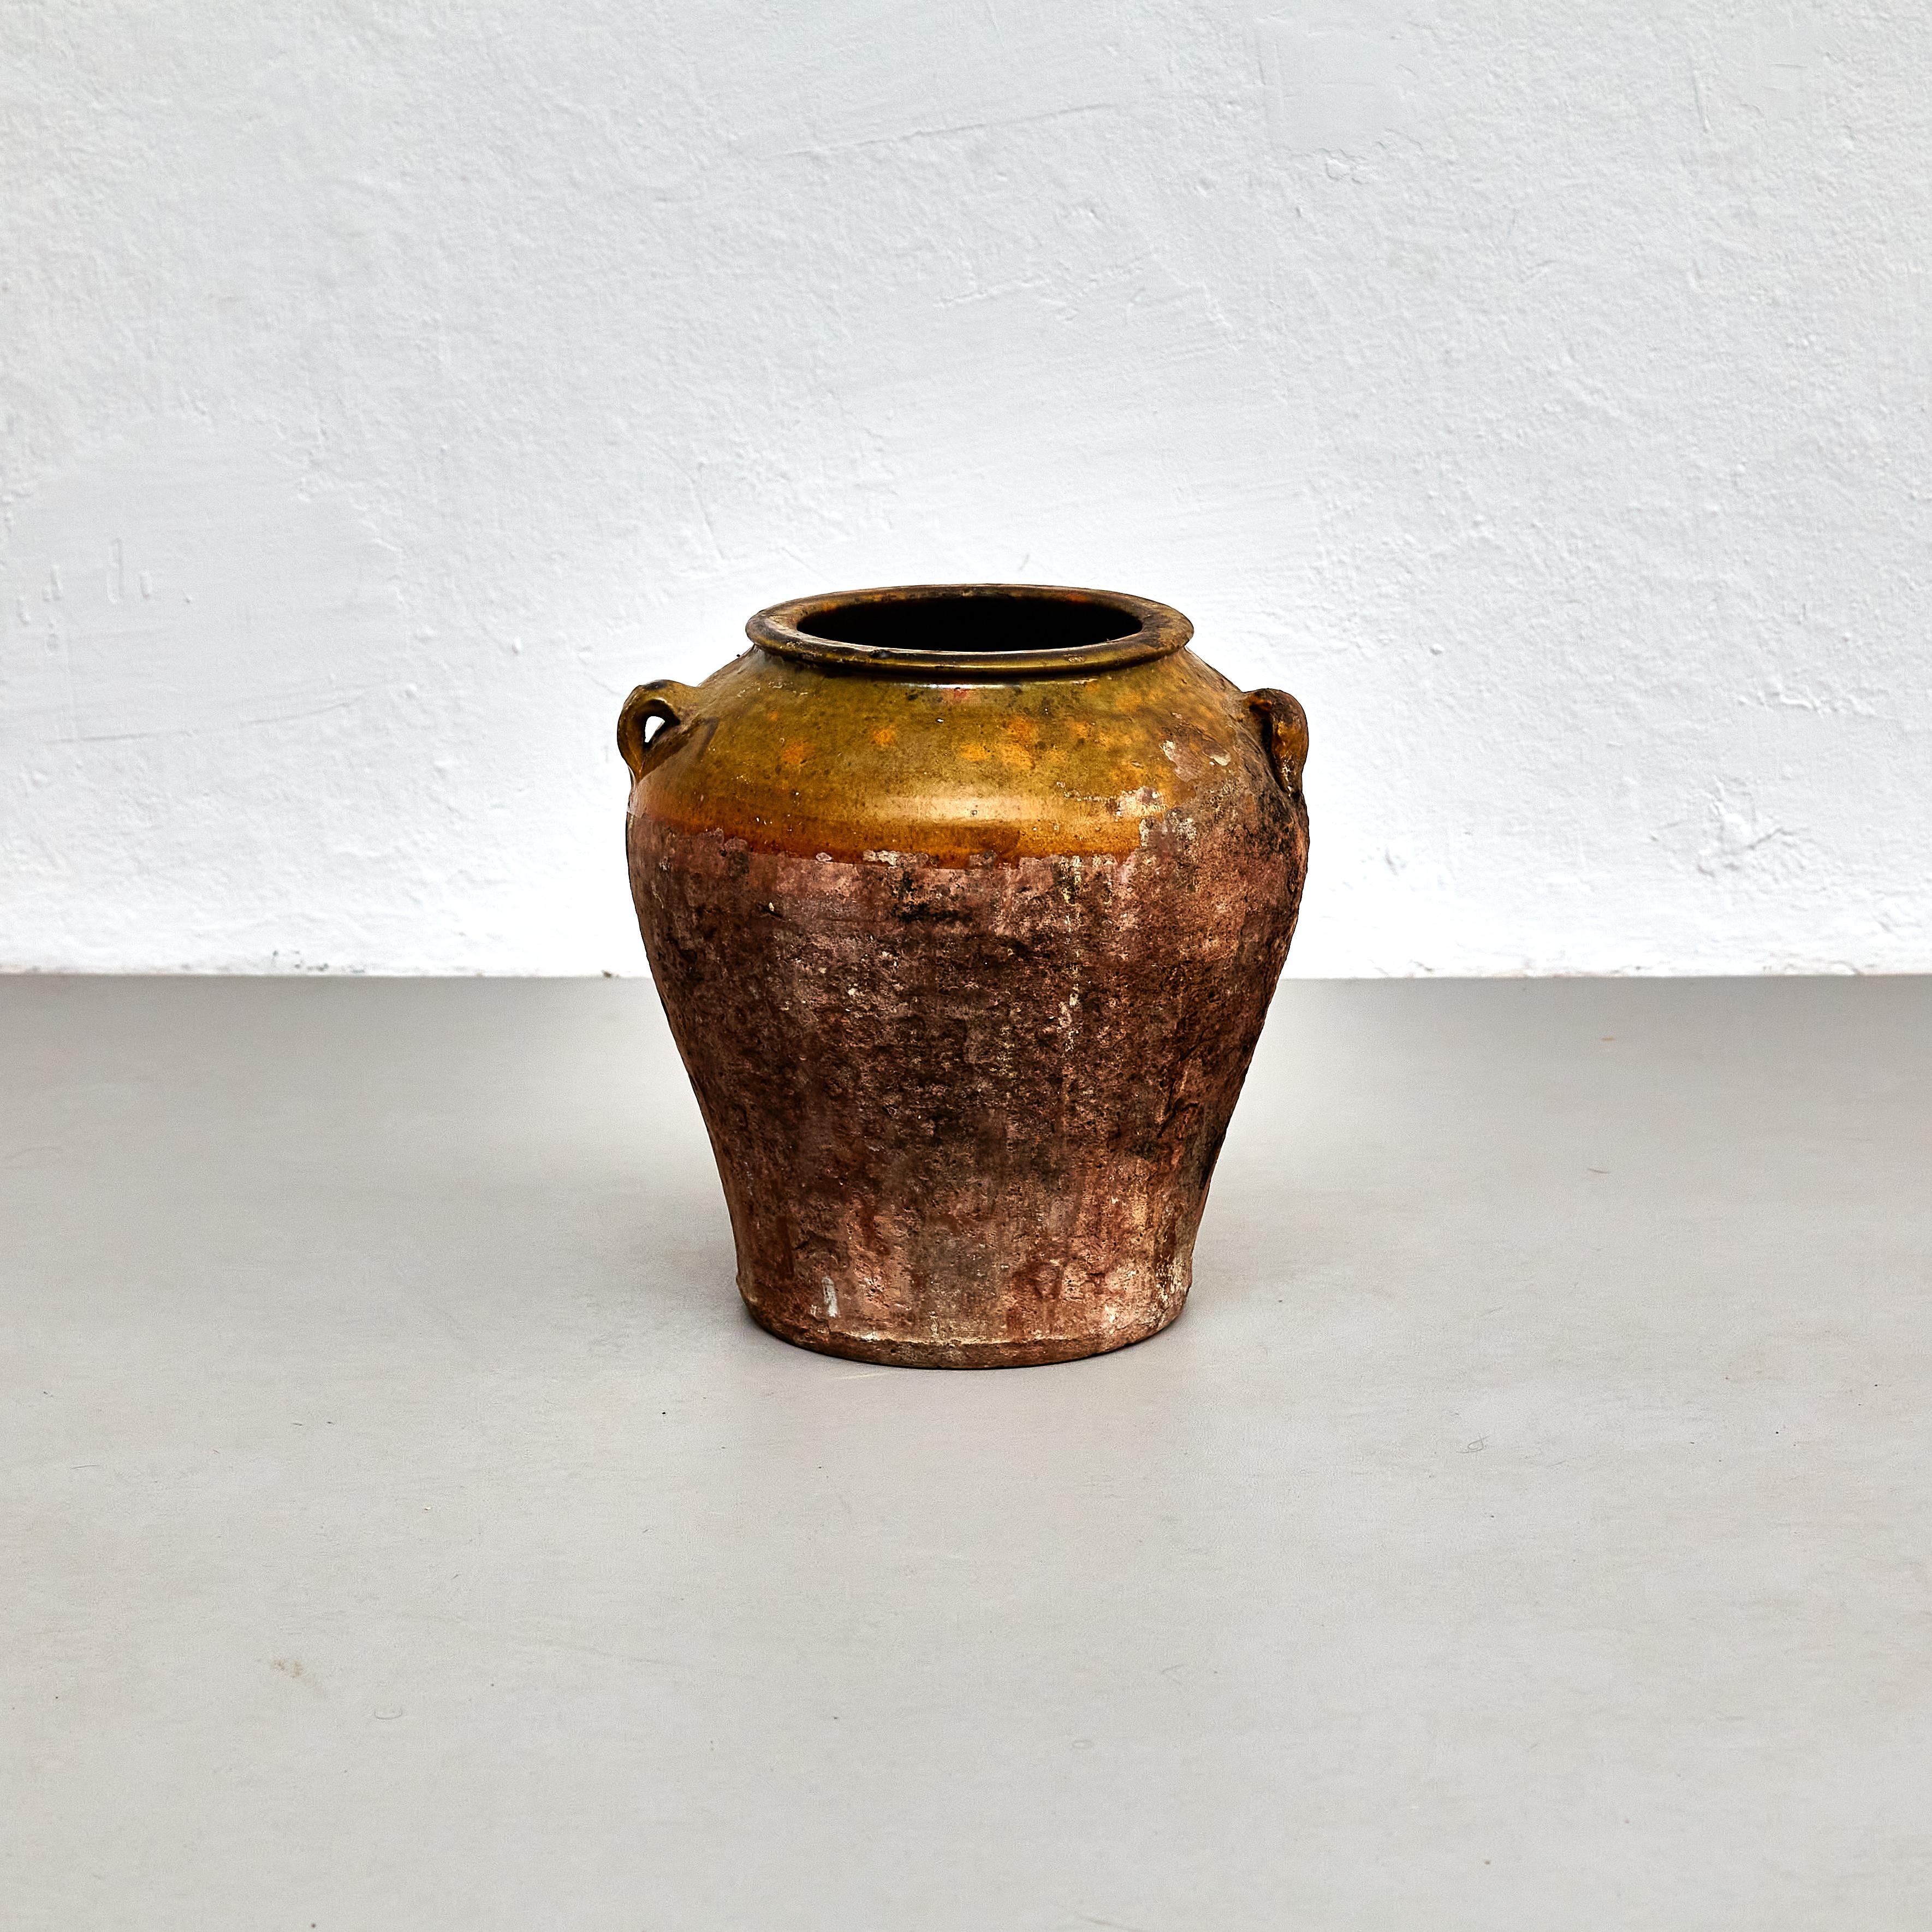 Early 20th century traditional Spanish ceramic vase.

Manufactured in Spain, early 20th century.

In original condition with minor wear consistent of age and use, preserving a beautiful patina.

Materials: 
Ceramic

Dimensions: 
Diam 32 cm